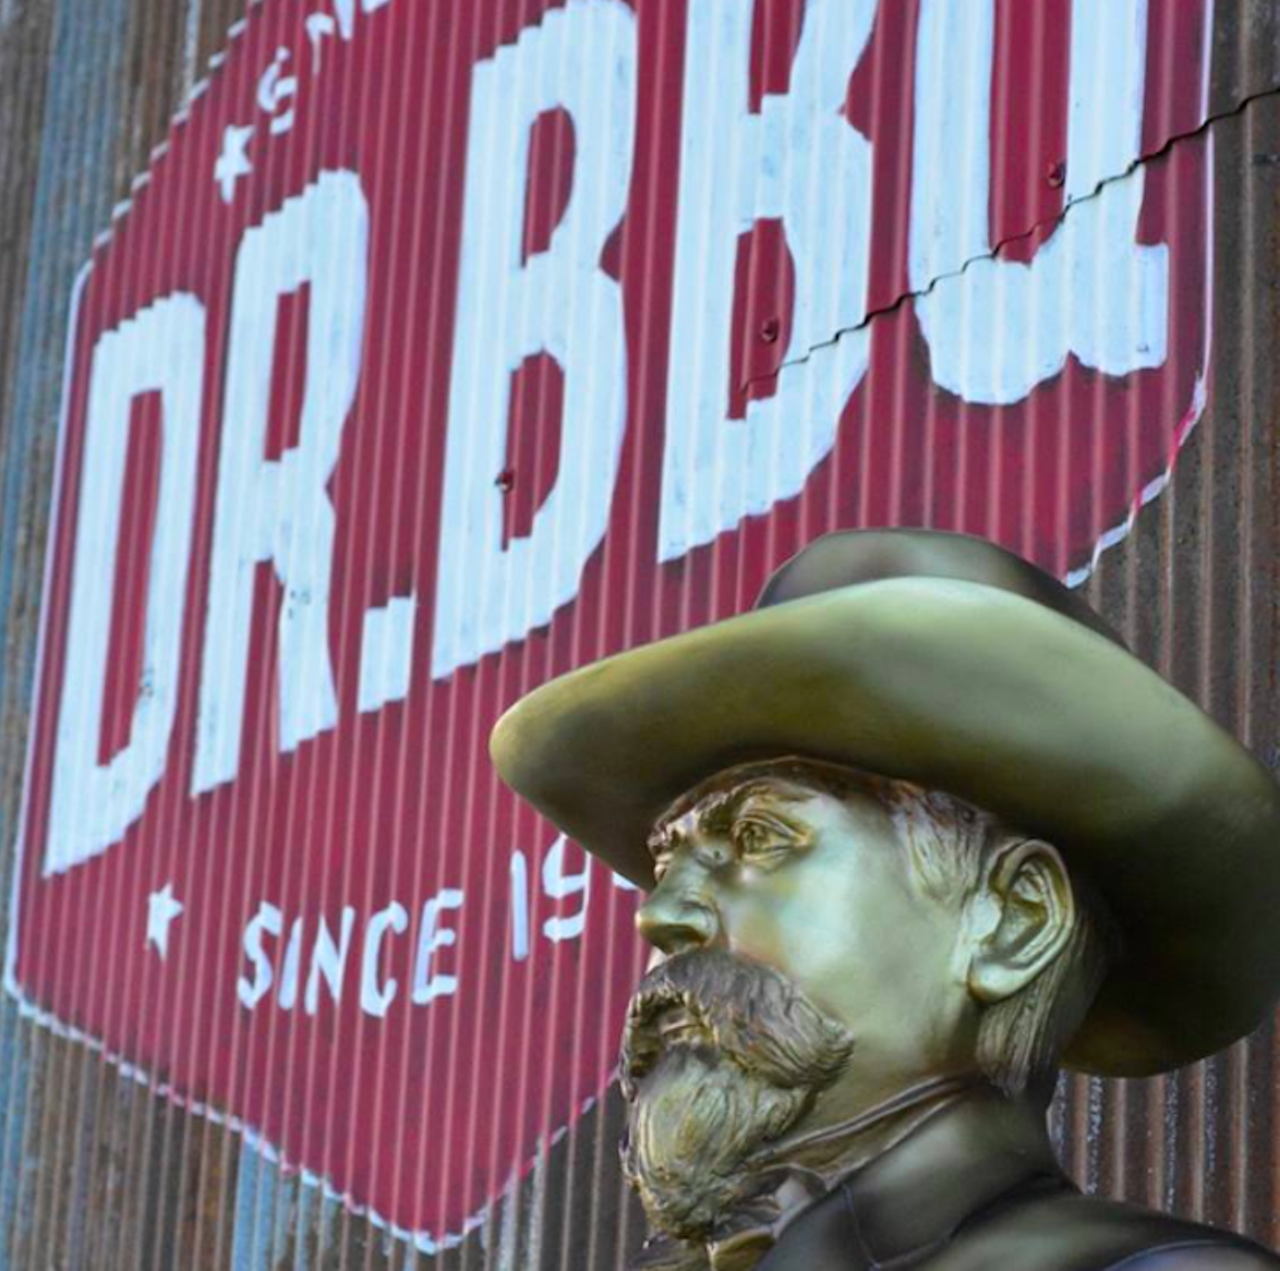 Dr. BBQ  
1101 1st Ave S., St. Pete 727-502-2820  
Wait, did you say fried Mac and cheese patties as burger buns? Yep, that&#146;s Datz&#146;s signature style. This is a must if you&#146;re in the city and need a Willy Wonka moment. 
Photo via Dr. BBQ/ Facebook 